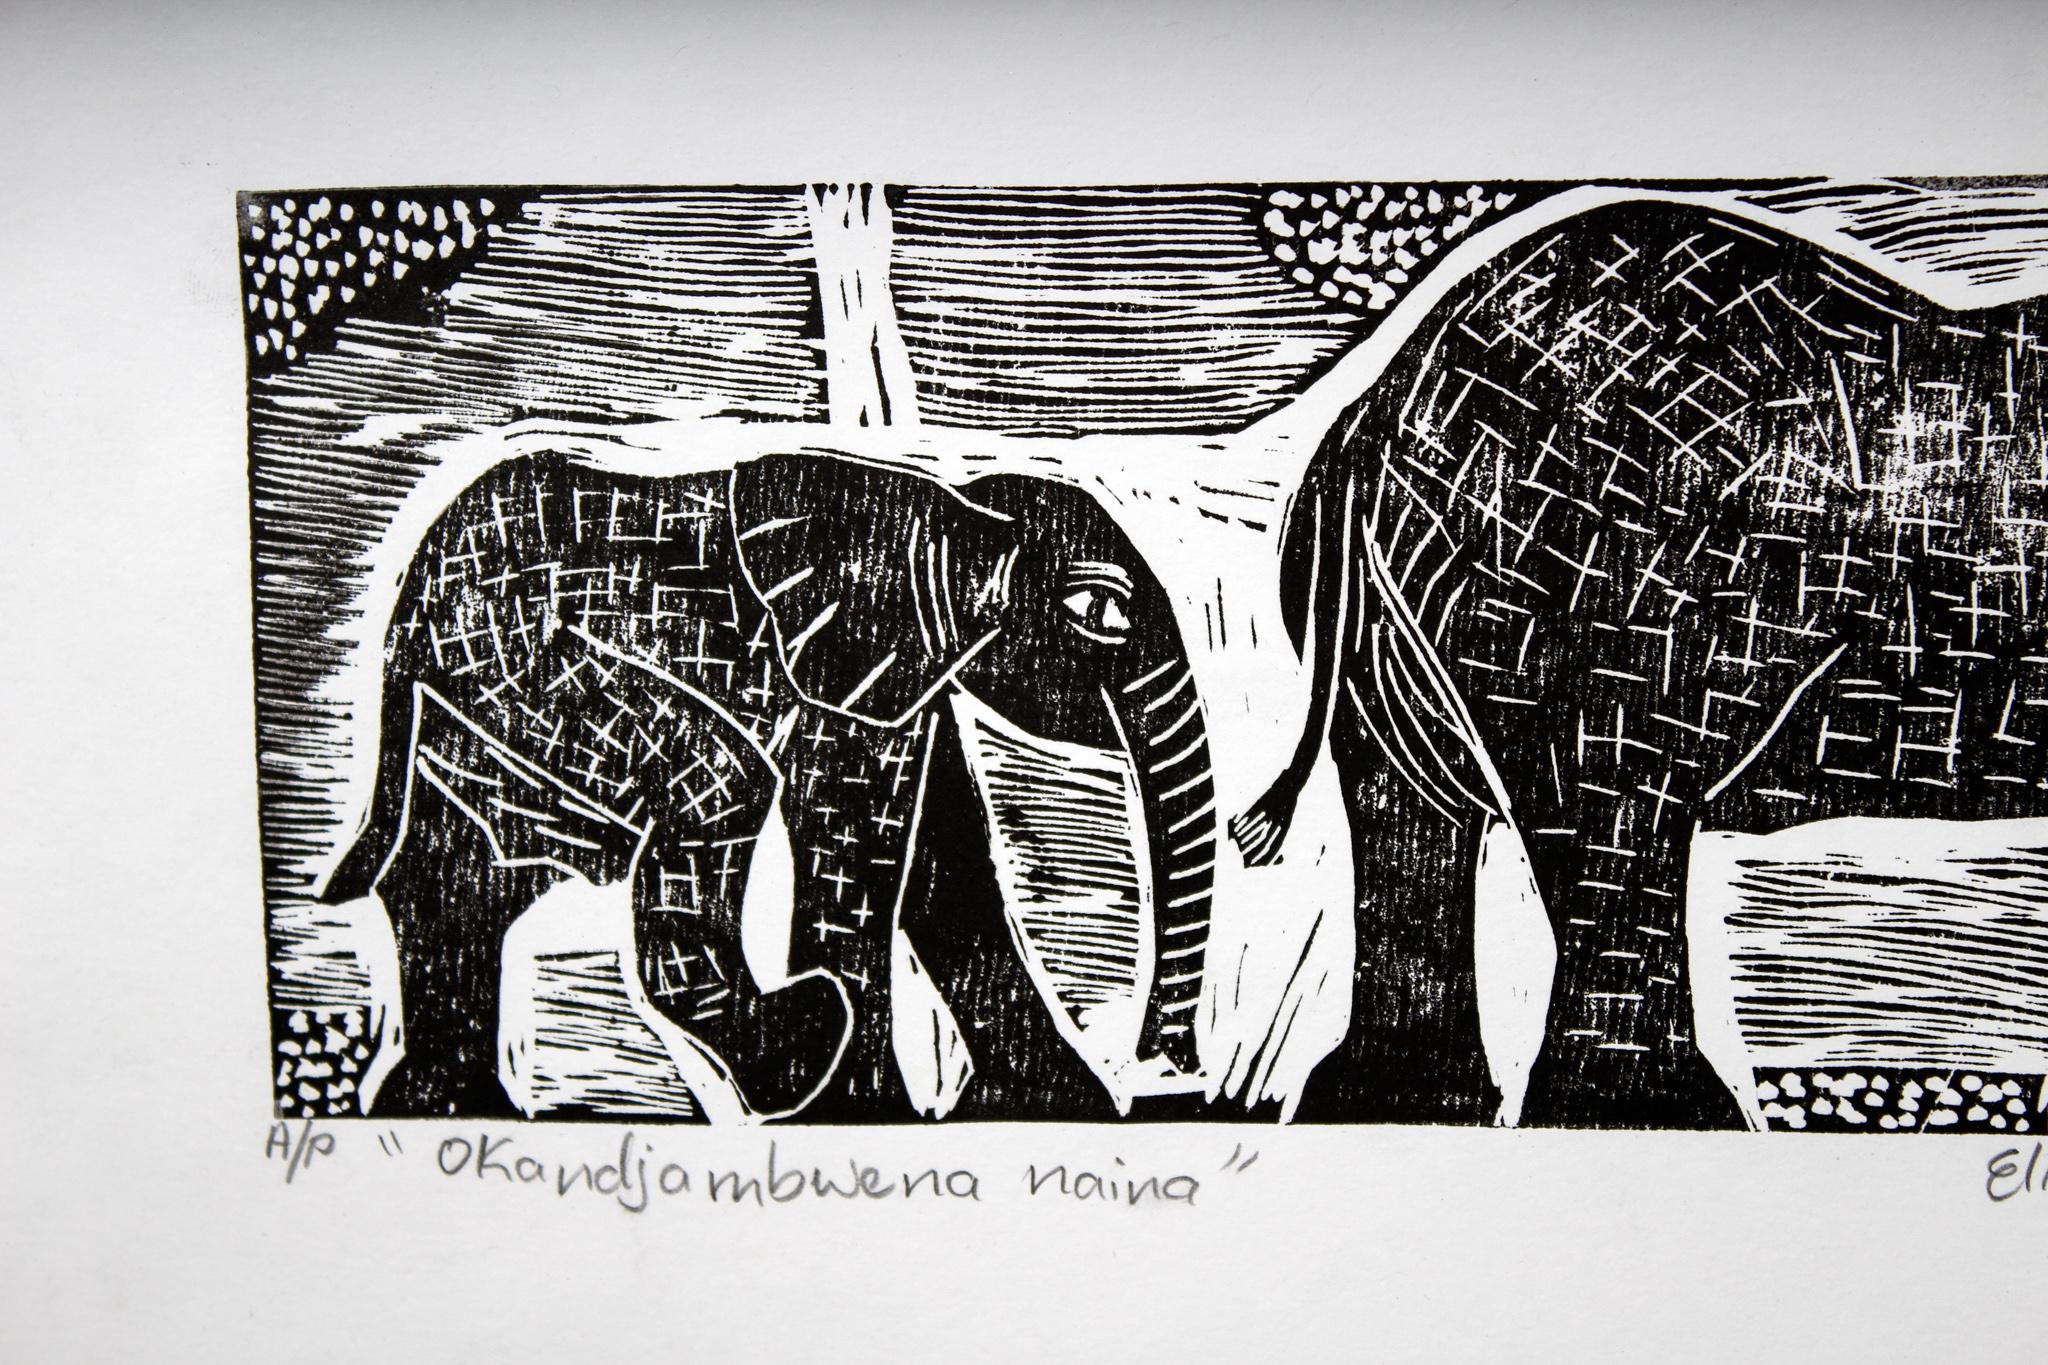 Okandjambwena naina, Linoleum block prints on paper.

Elia Shiwoohamba was born in 1981 in Windhoek, Namibia. He graduated from the John Muafangejo Art Centre in Windhoek in 2006. Specialising in printmaking and sculpture, Shiwoohamba works as a